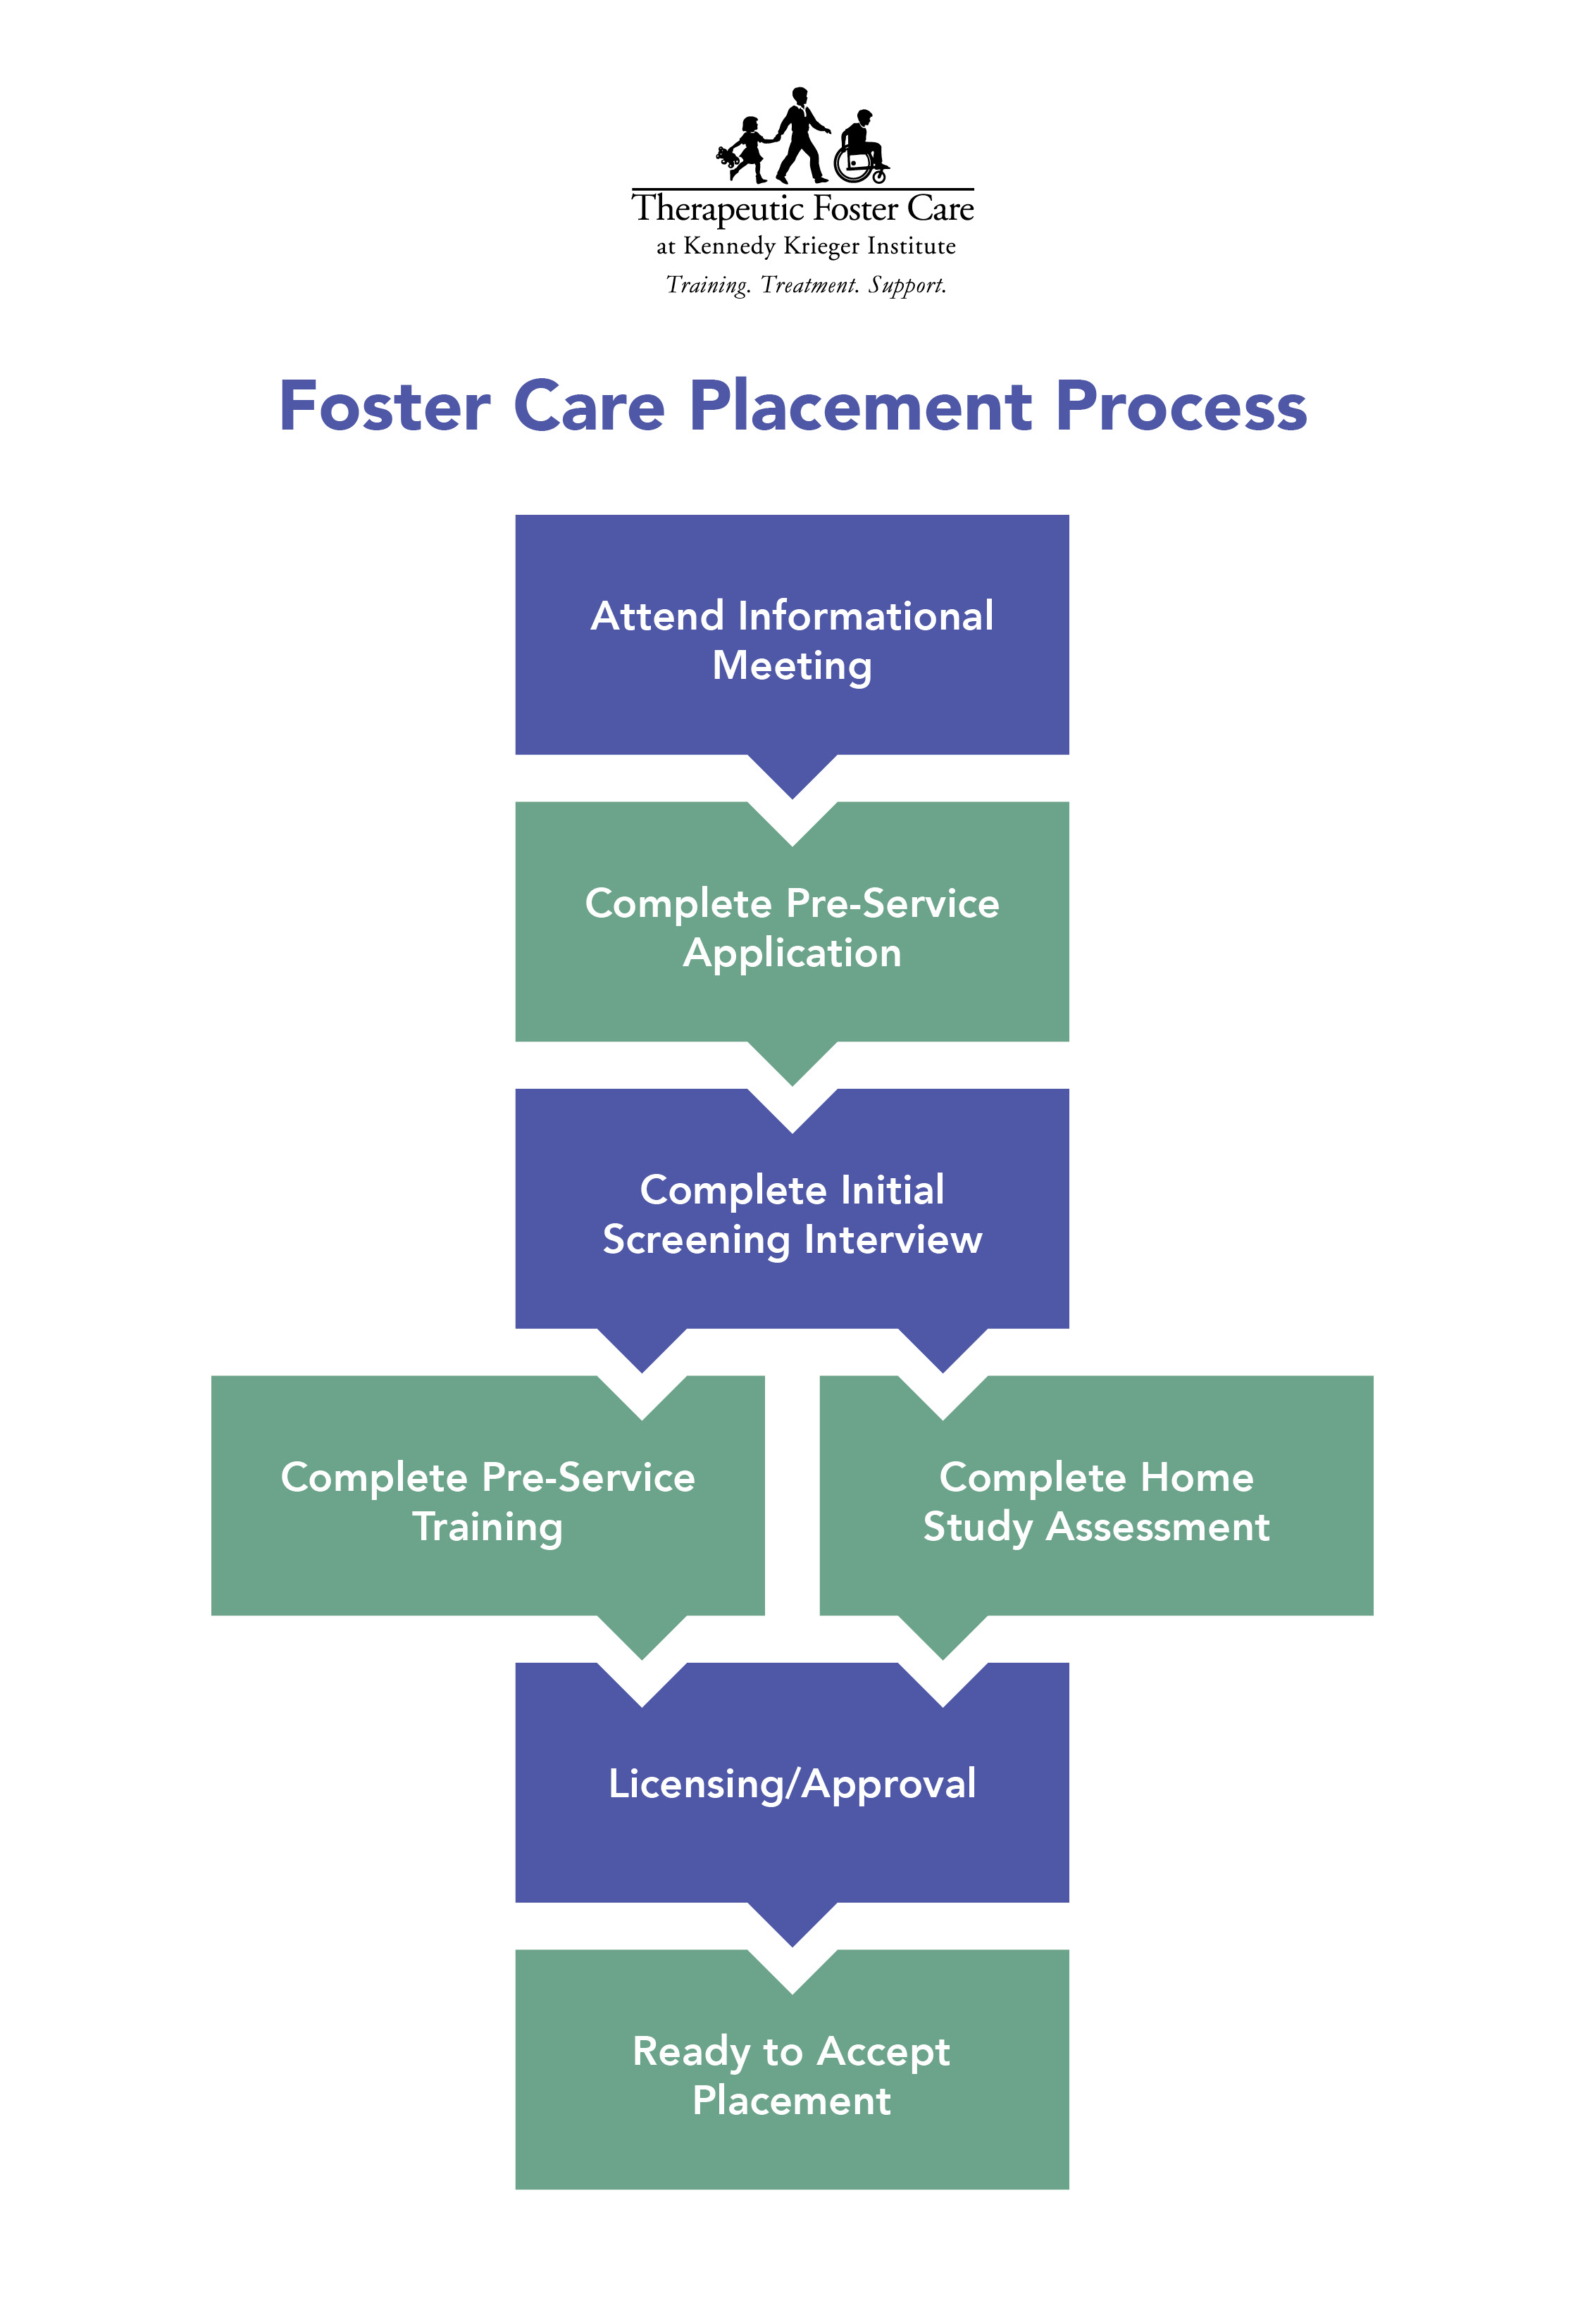 Foster Care Placement Process